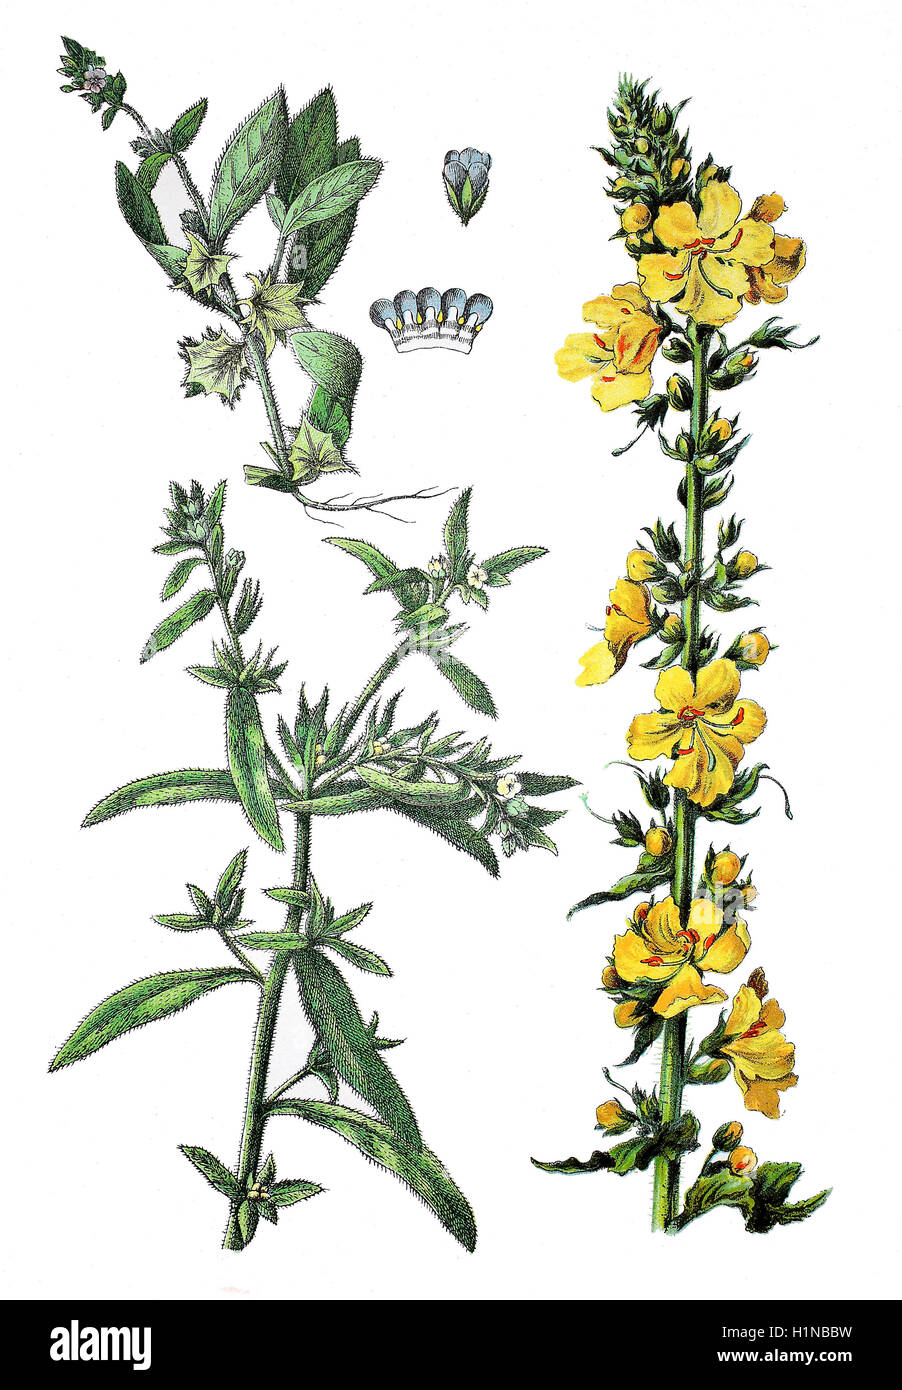 Field Gromwell, Buglossoides arvensis, Syn.: Lithospermum arvense (bottem left), madwort, Asperugo procumbens (top left), great mullein or common mullein, Verbascum thapsus (right) Stock Photo